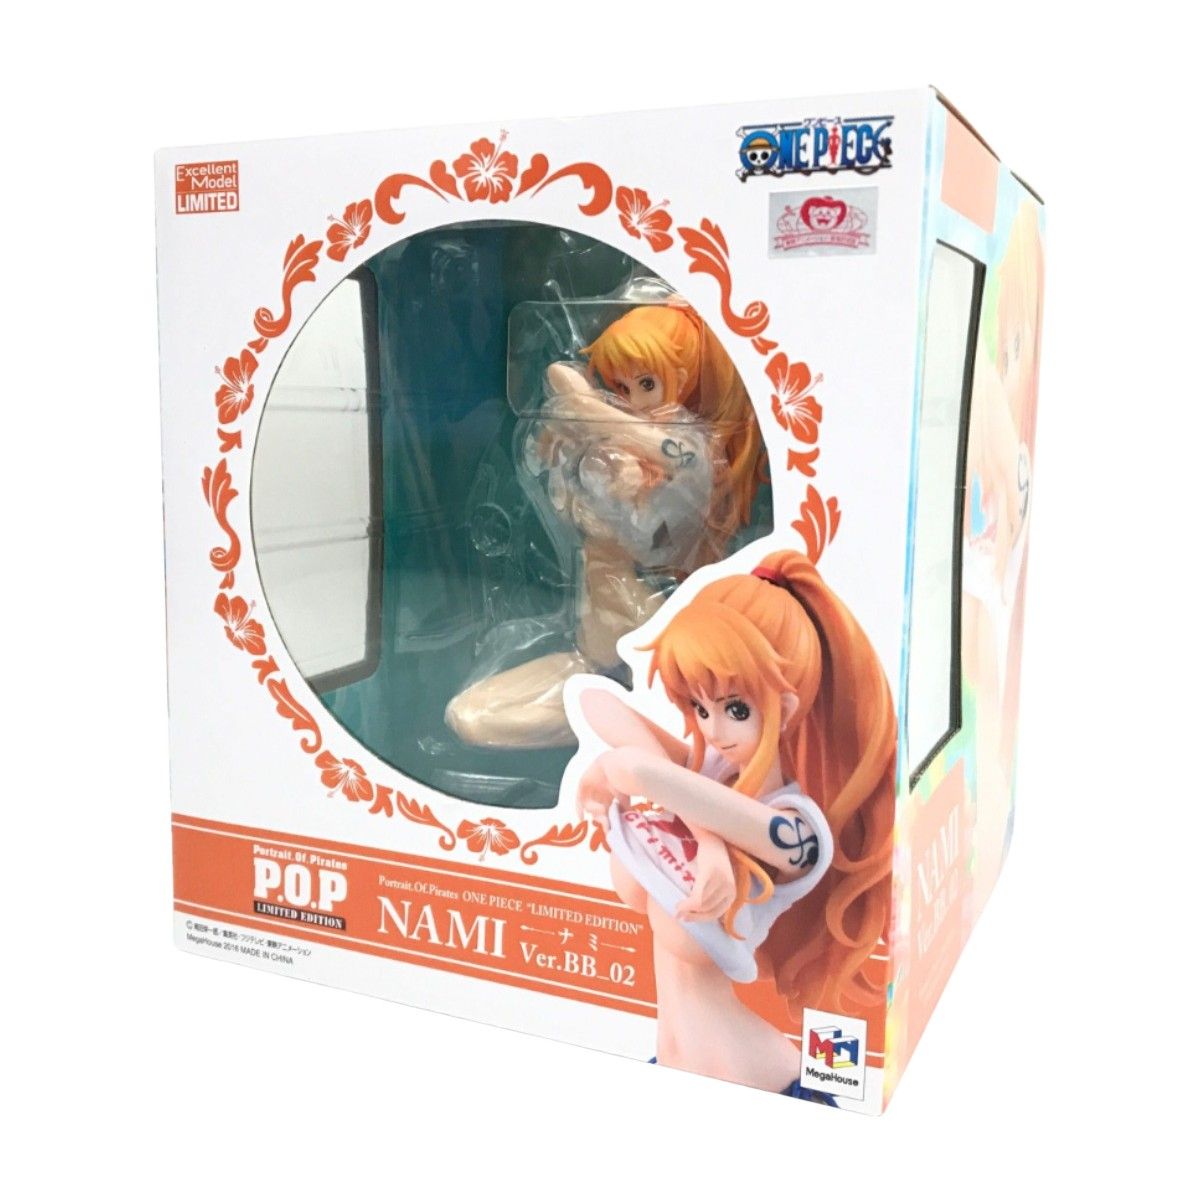 ▽▽ ONE PIECE NAMI LIMITED EDITIONワンピース P.O.P ナミ ver. BB 